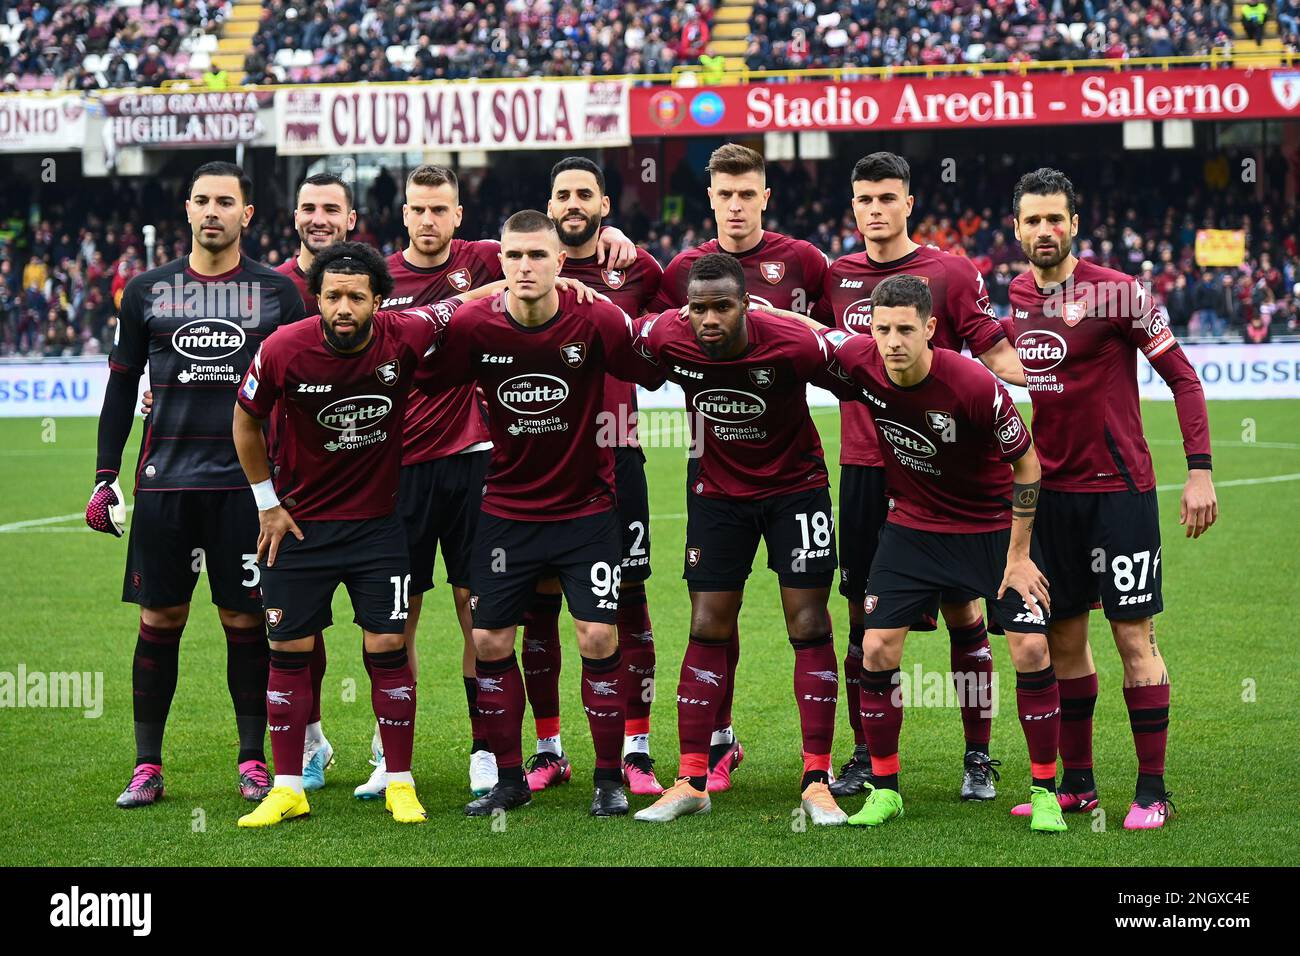 SALERNO, ITALY - FEBRUARY, 19: The US Salernitana team is posing for the photograph before the Serie A match between US Salernitana and SS Lazio at Stadio Arechi, Salerno, Italy on February 19, 2023. Photo by Nicola Ianuale Credit: Nicola Ianuale/Alamy Live News Stock Photo